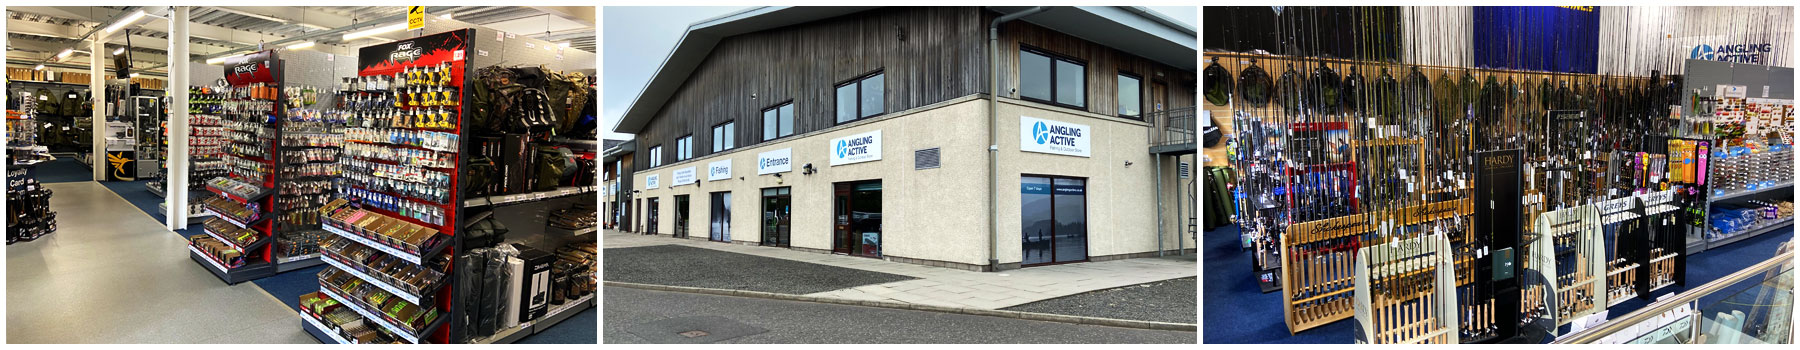 Angling Active Stirling Shop